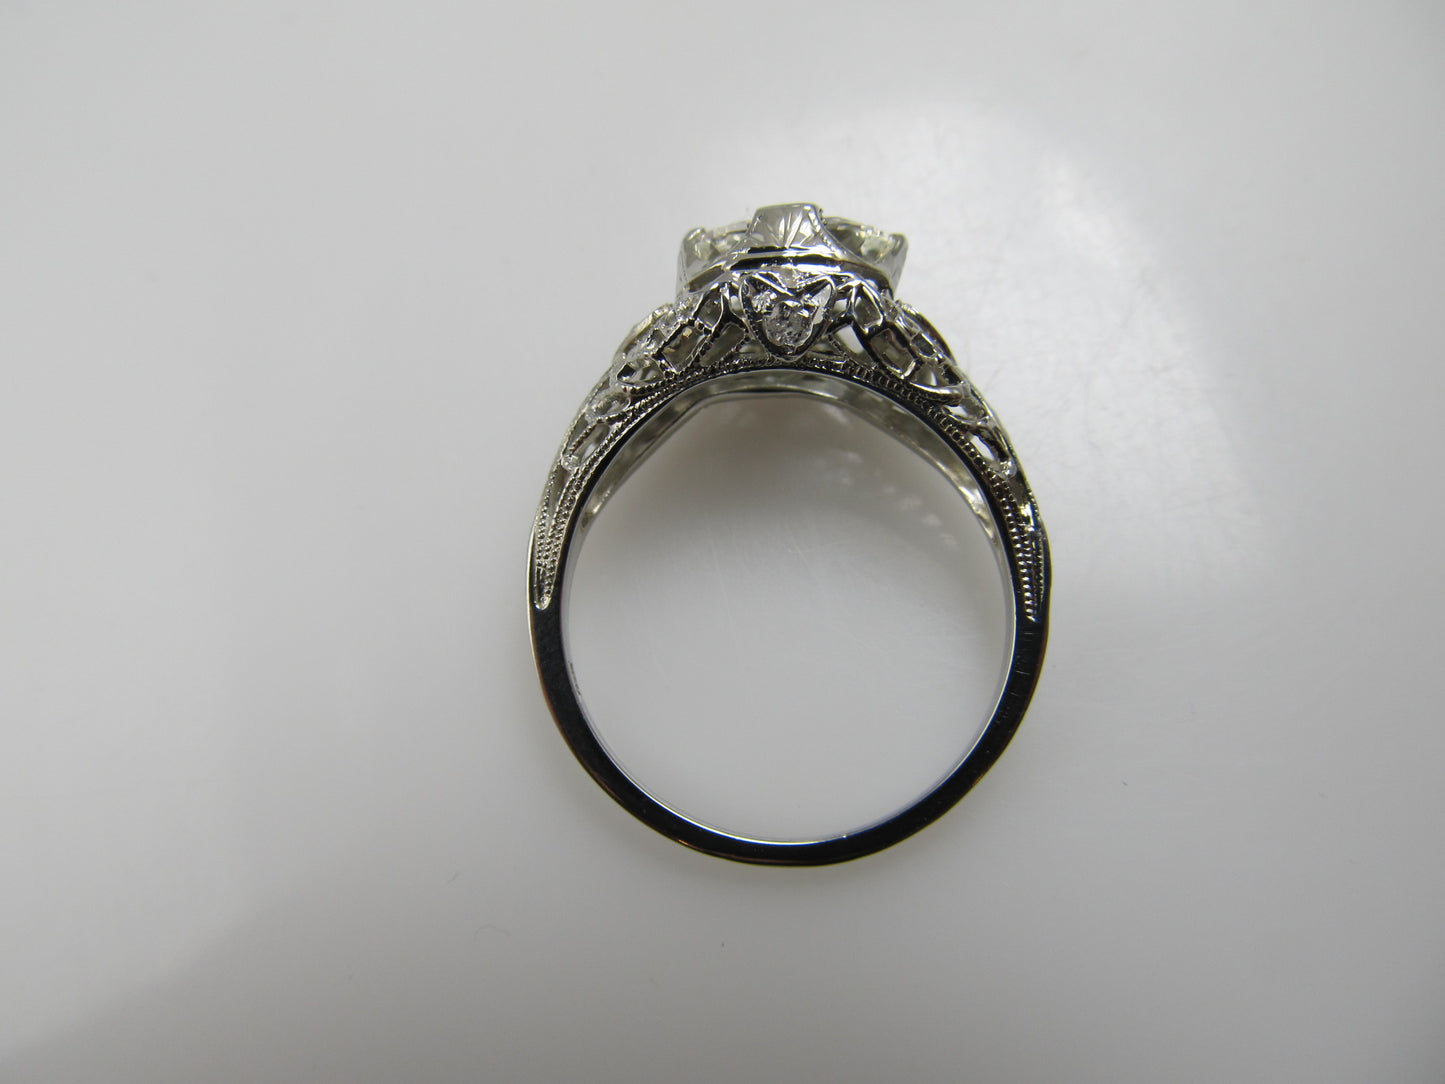 18k White Gold Filigree Ring With A 1.21ct Oval Cut Diamond, Circa 1920